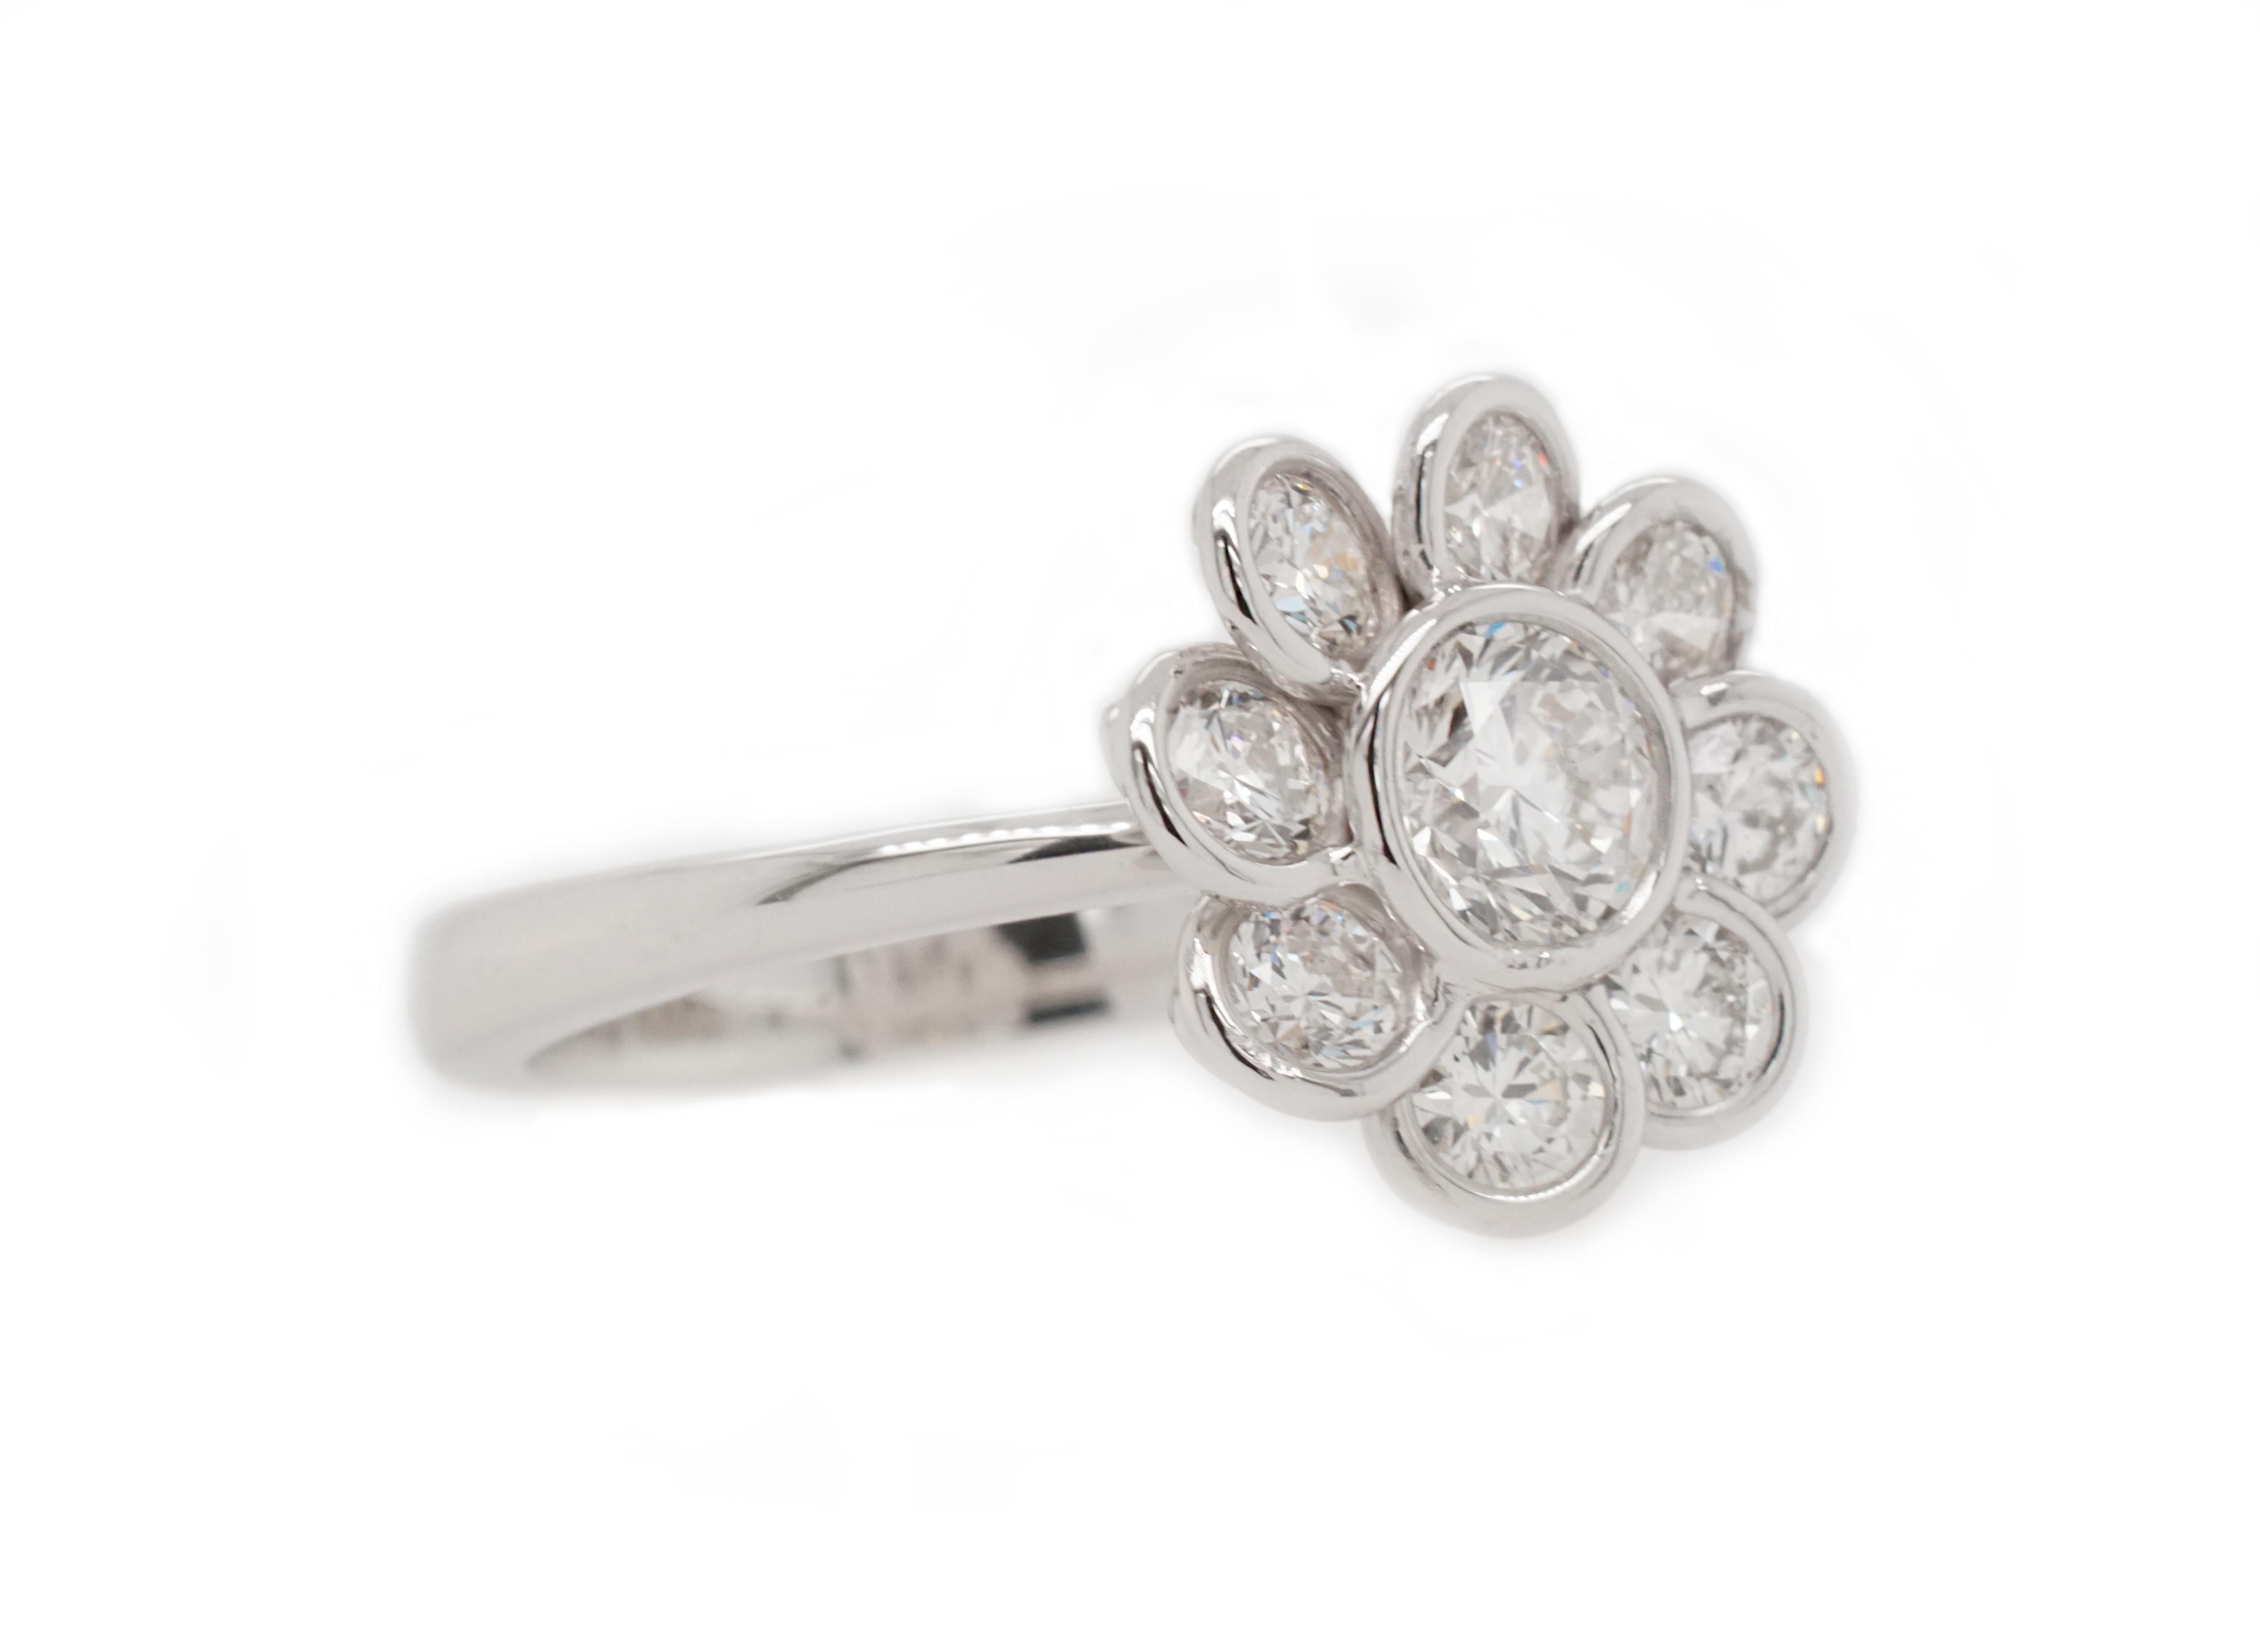 This elegant and poetic ring features 9 bezel-set round brilliant white diamonds in the shape of a flower. 

Set in 14K white gold. 

Center stone: Round brilliant white diamond - 0.50 carat, G color, SI1 clarity. 

Accent stones: Round brilliant